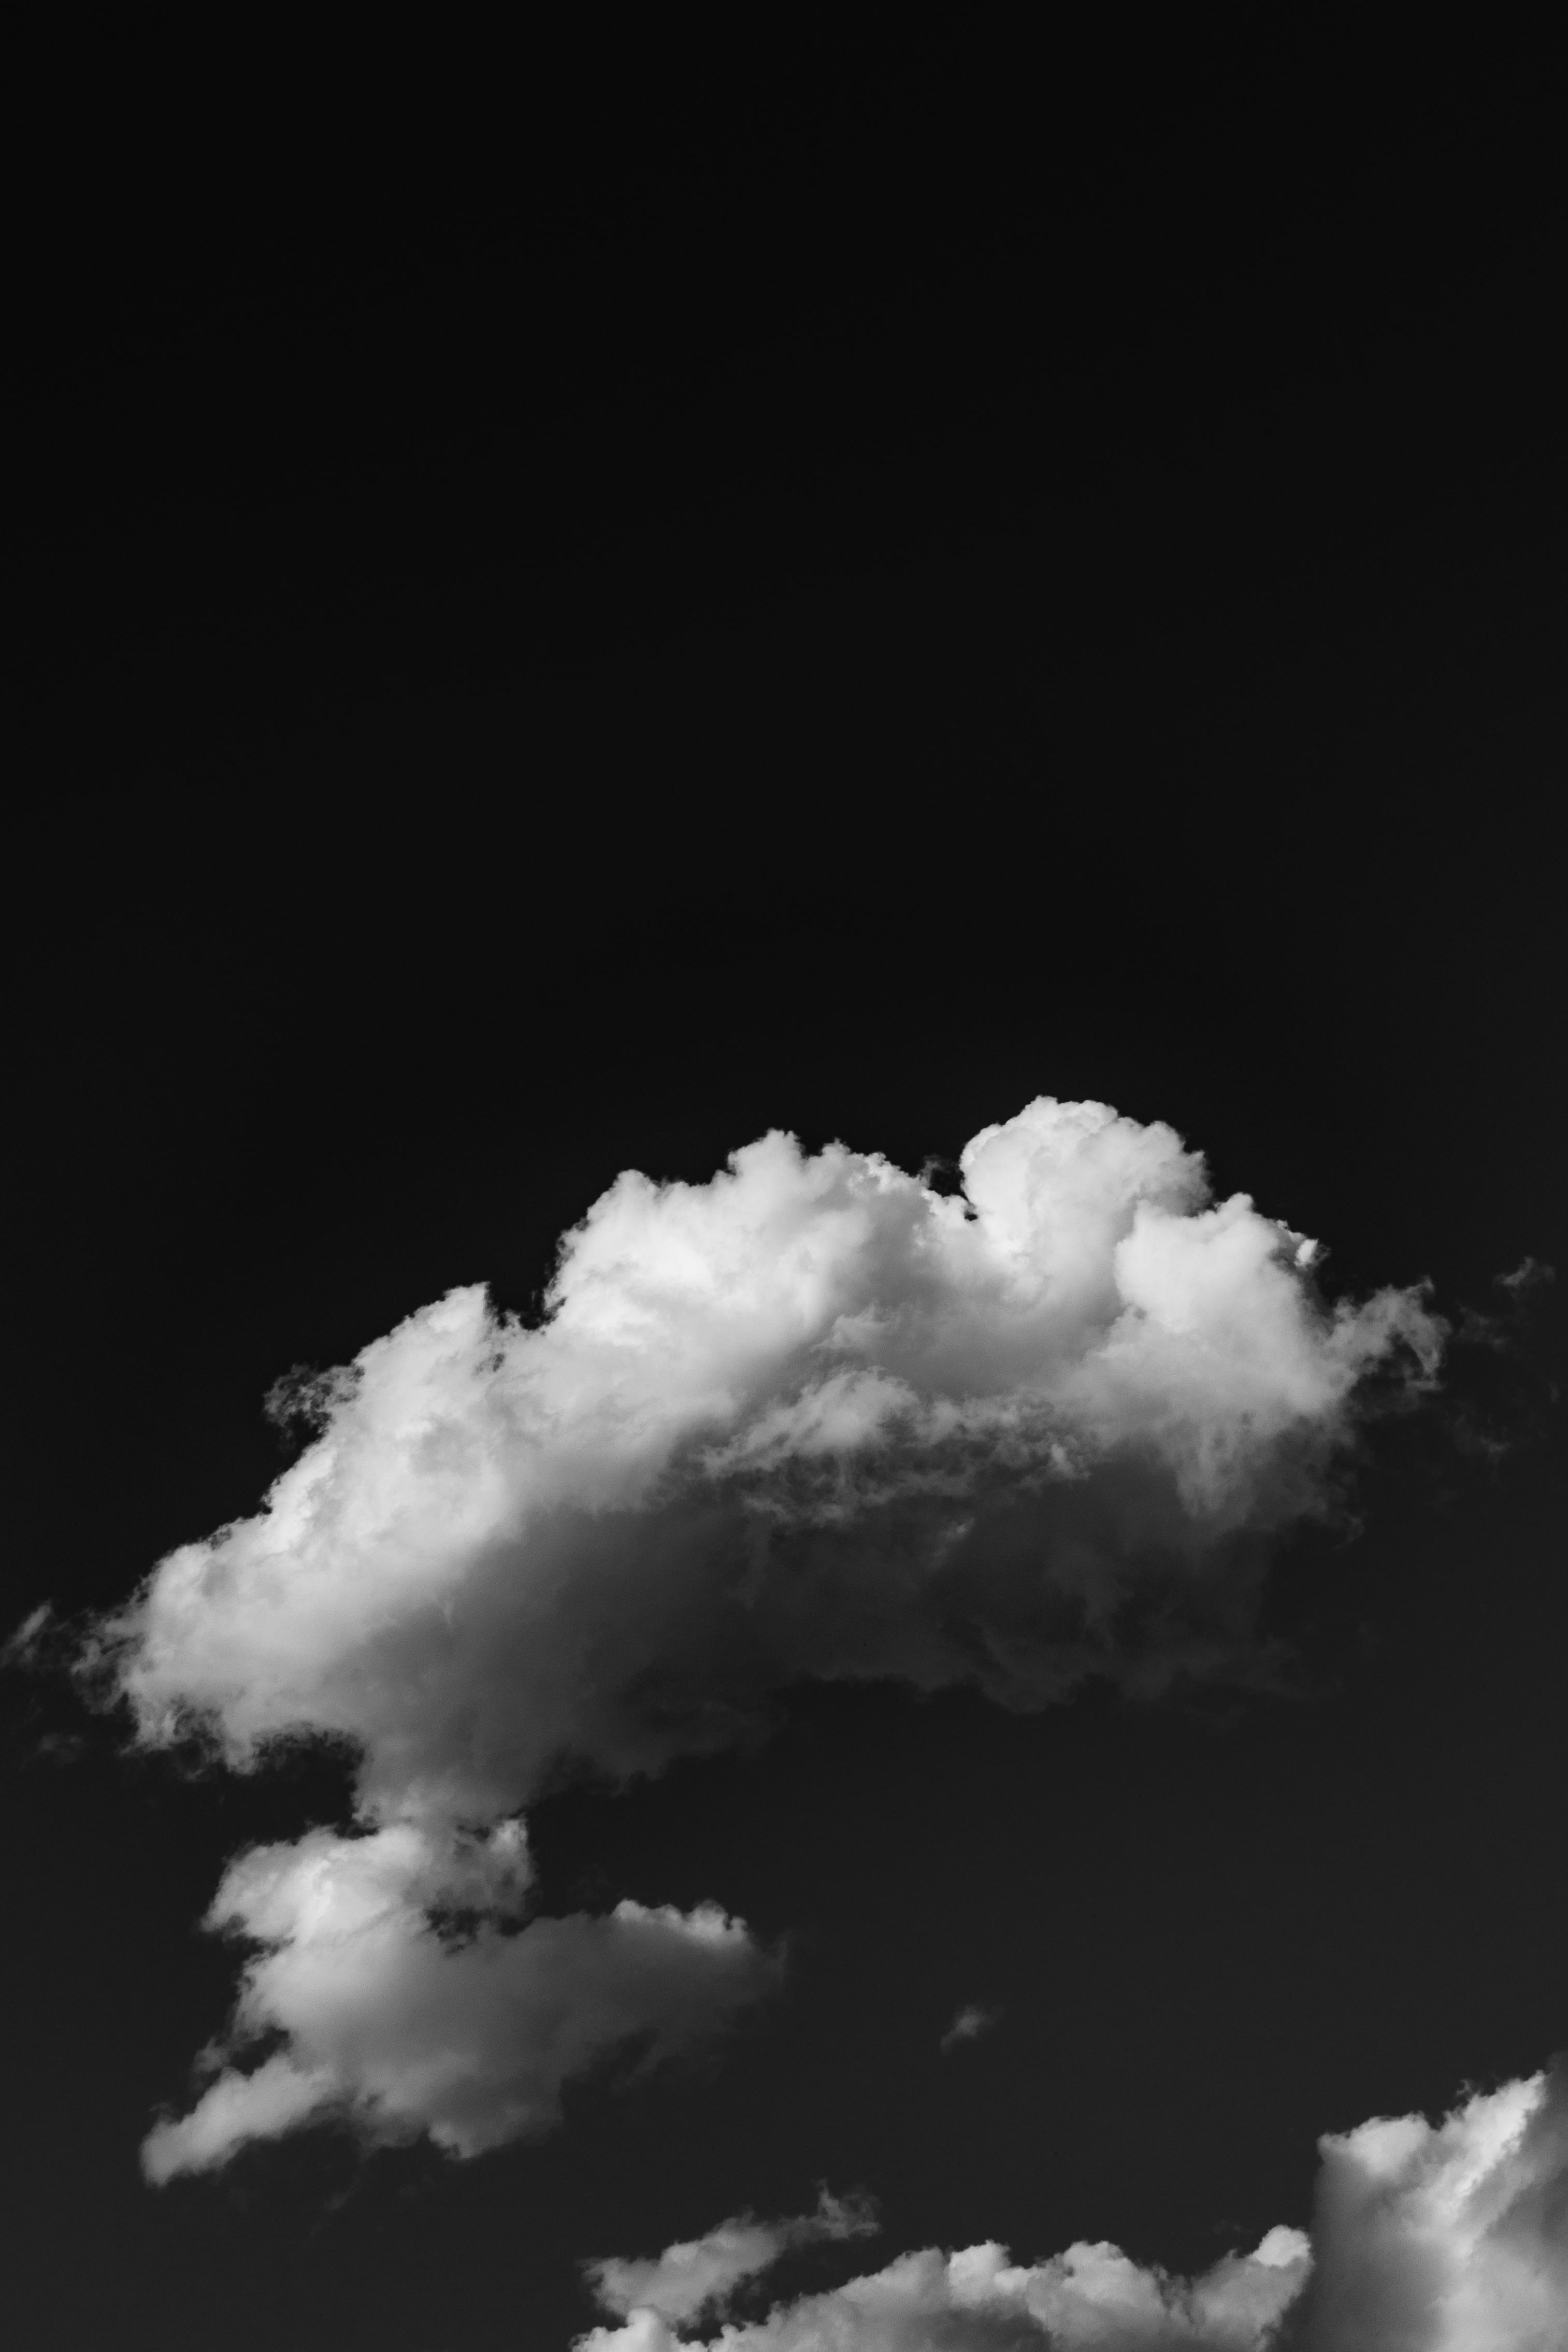 clouds, nature, sky, bw, chb, porous